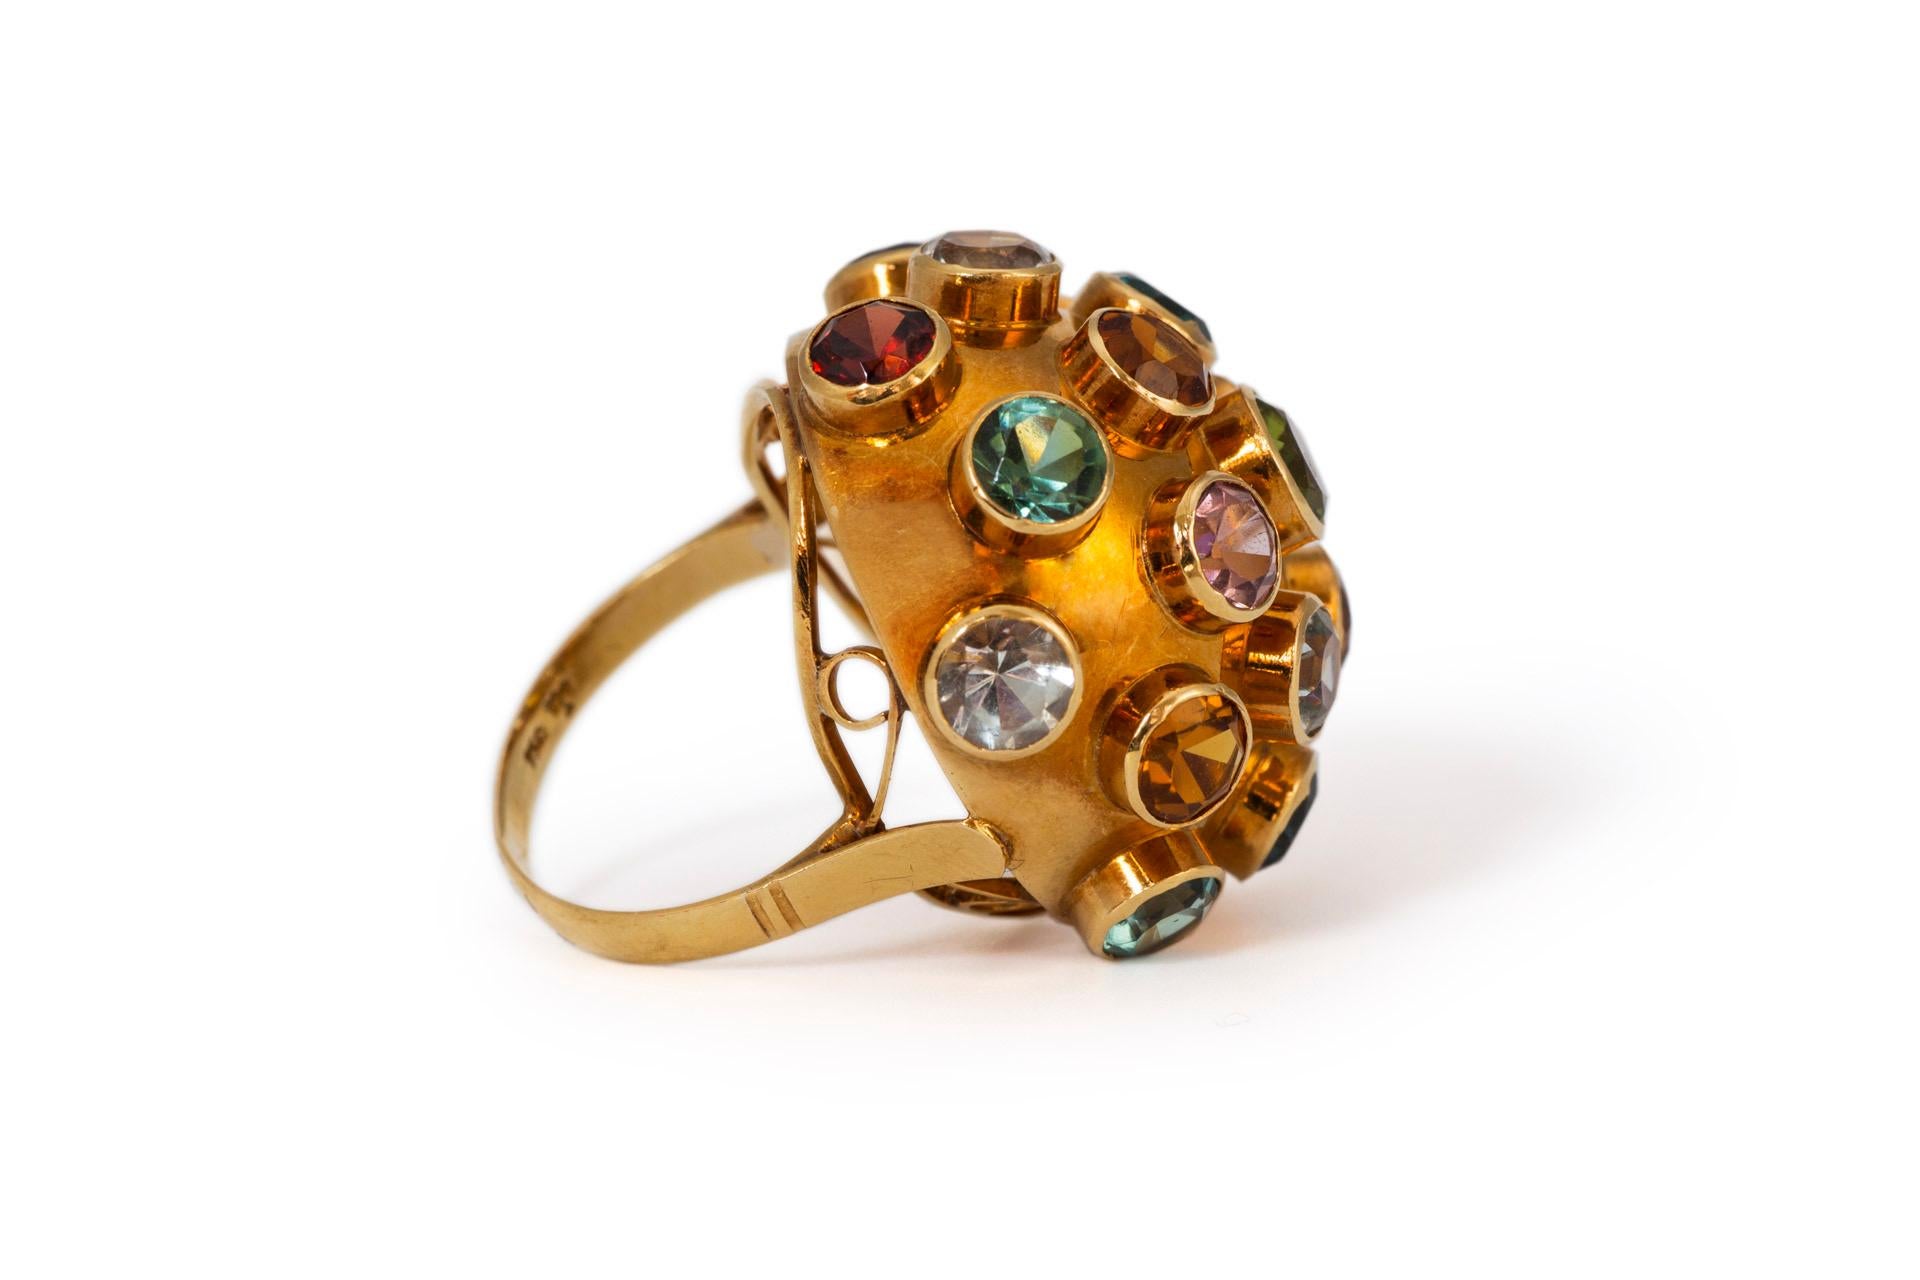 Large sized iconic H Stern Sputnik ring from Brazil featuring multi gems including peridot, amethyst, citrine, green tourmaline, aquamarine, garnet and blue sapphire. Designed in the mid 1950’s to showcase the multitude of Brazilian mined gemstones.